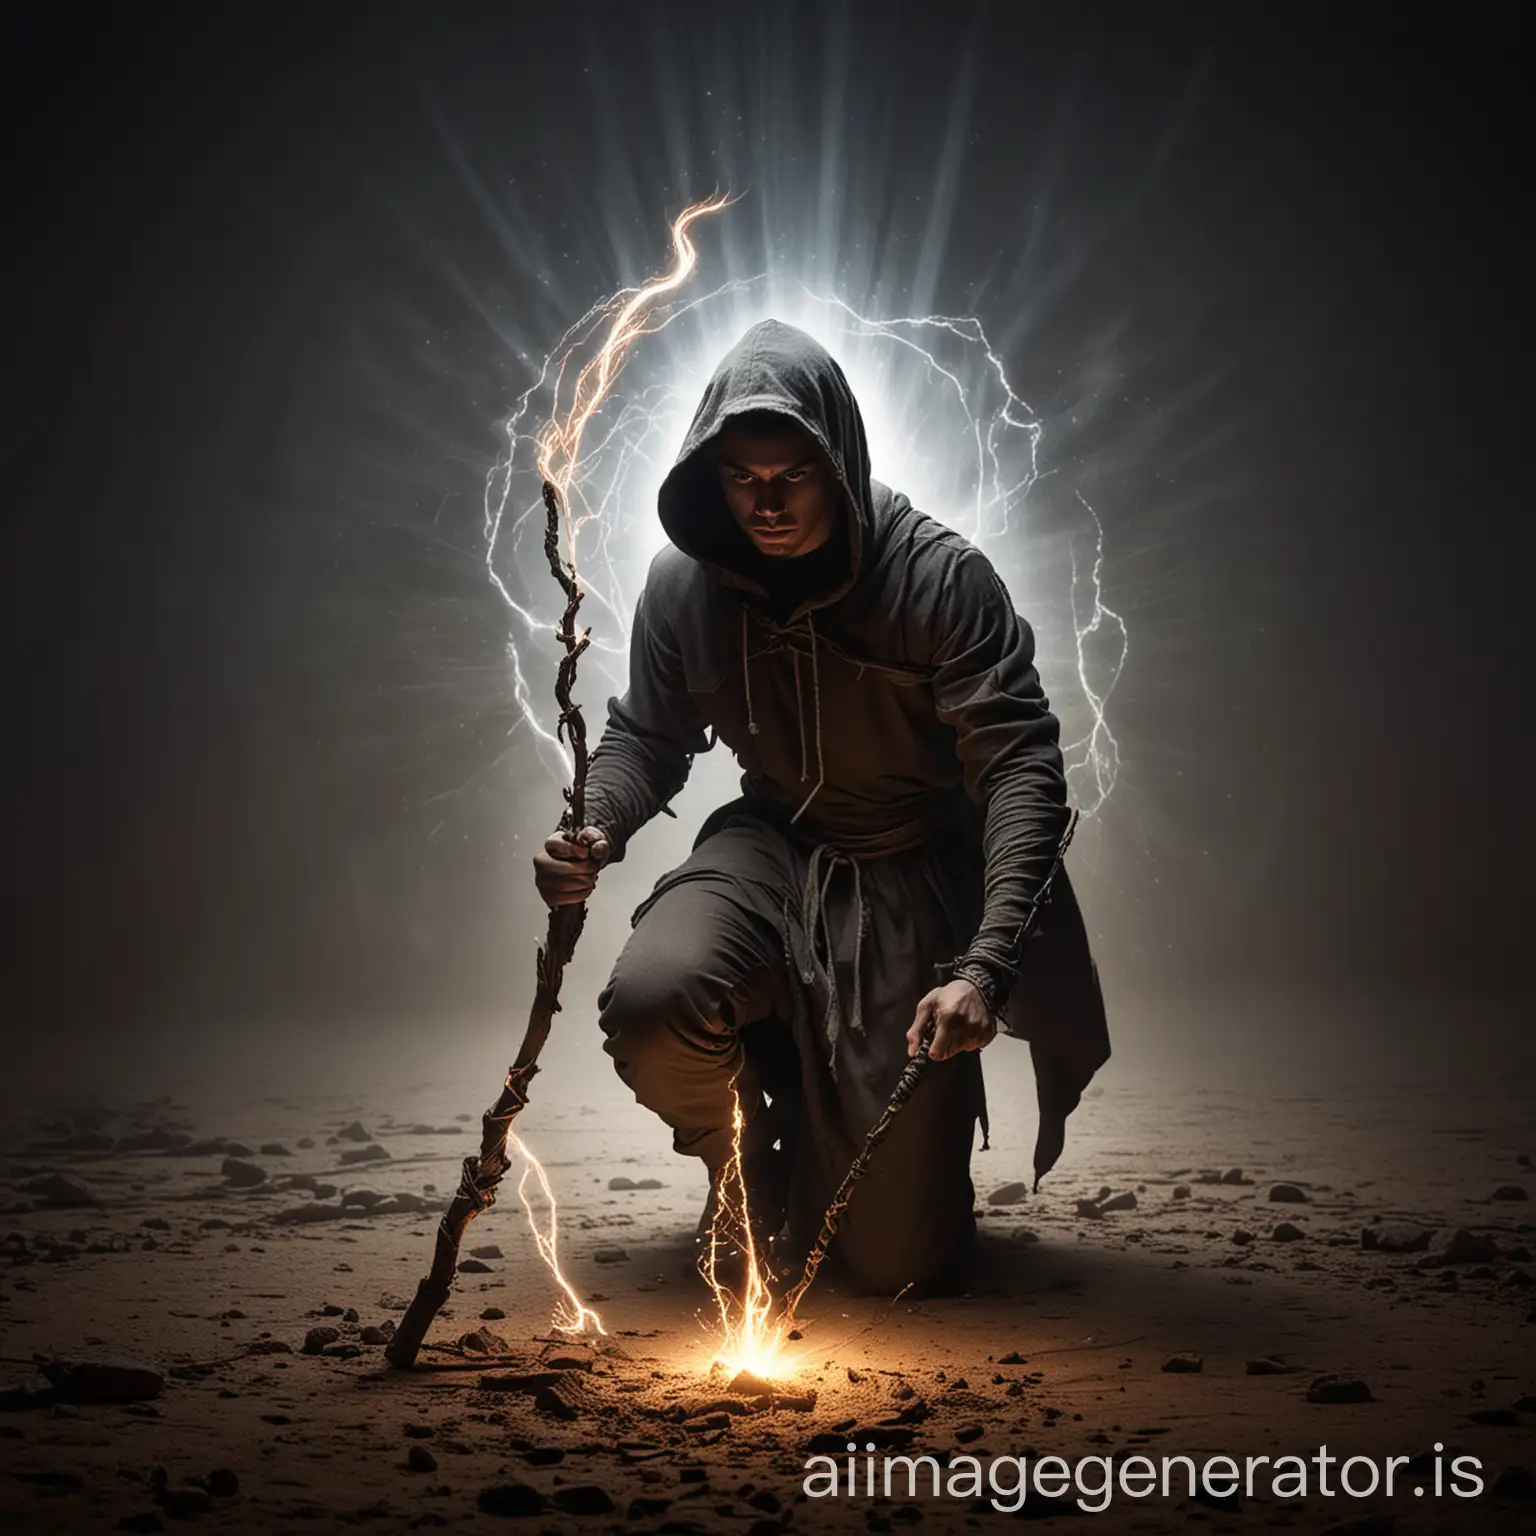 A spiritual warrior young man with a hood, and a proud expression holding a staff in a dimly lit on the ground, in action position, creating an energy ripple effect on the ground magical setting